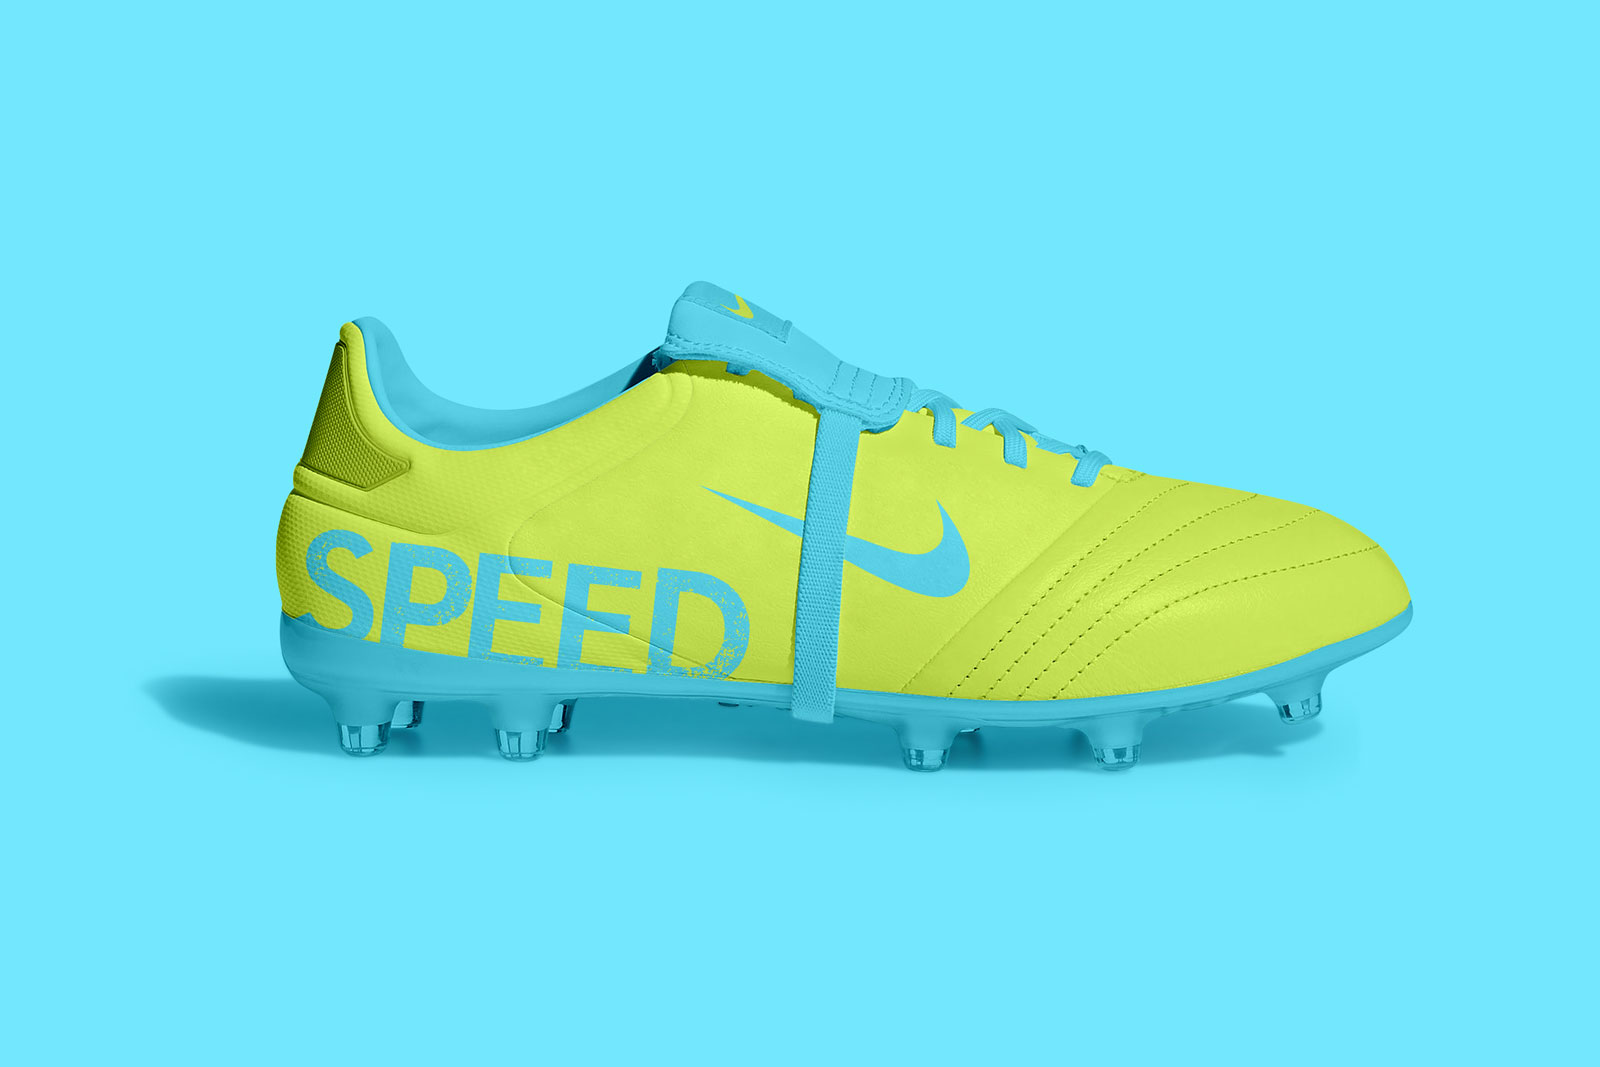 Free-Soccer-Cleats-Shoes-Mockup-PSD